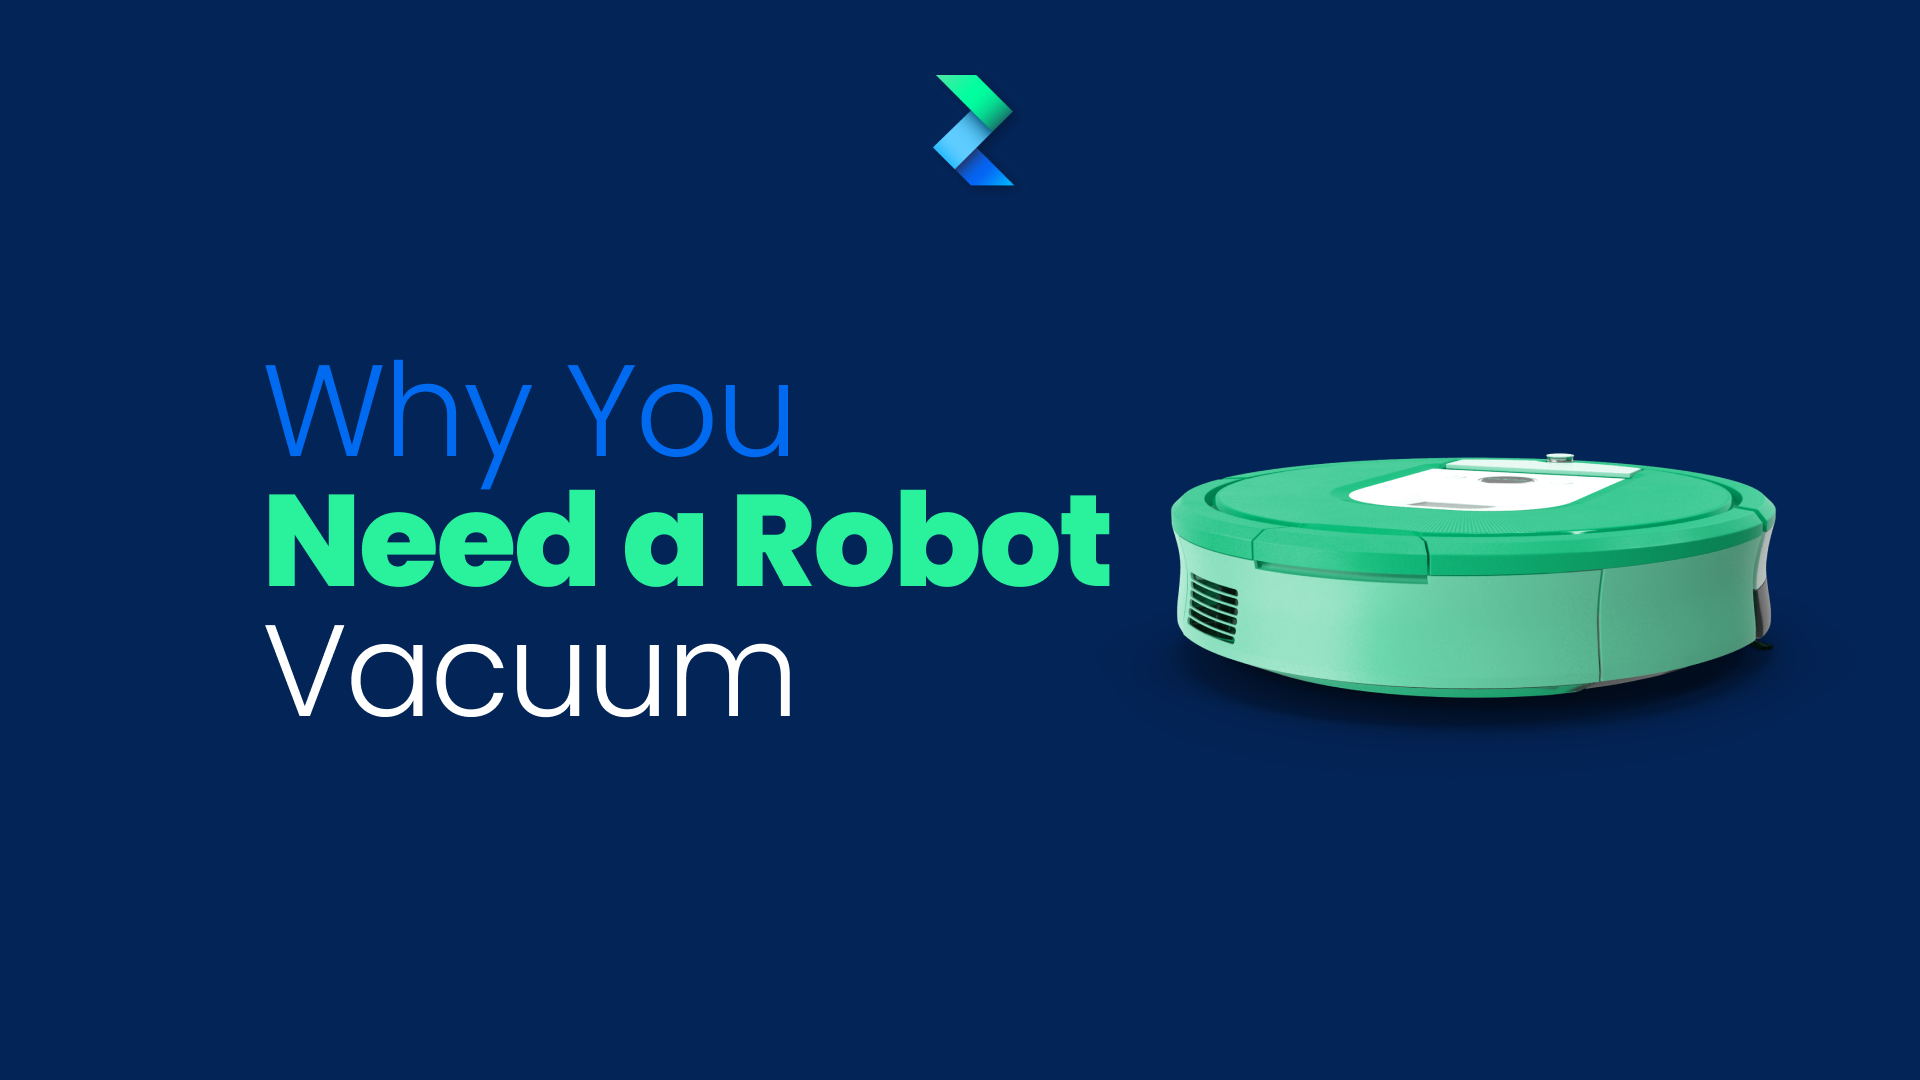 Why You Need a Robot Vacuum